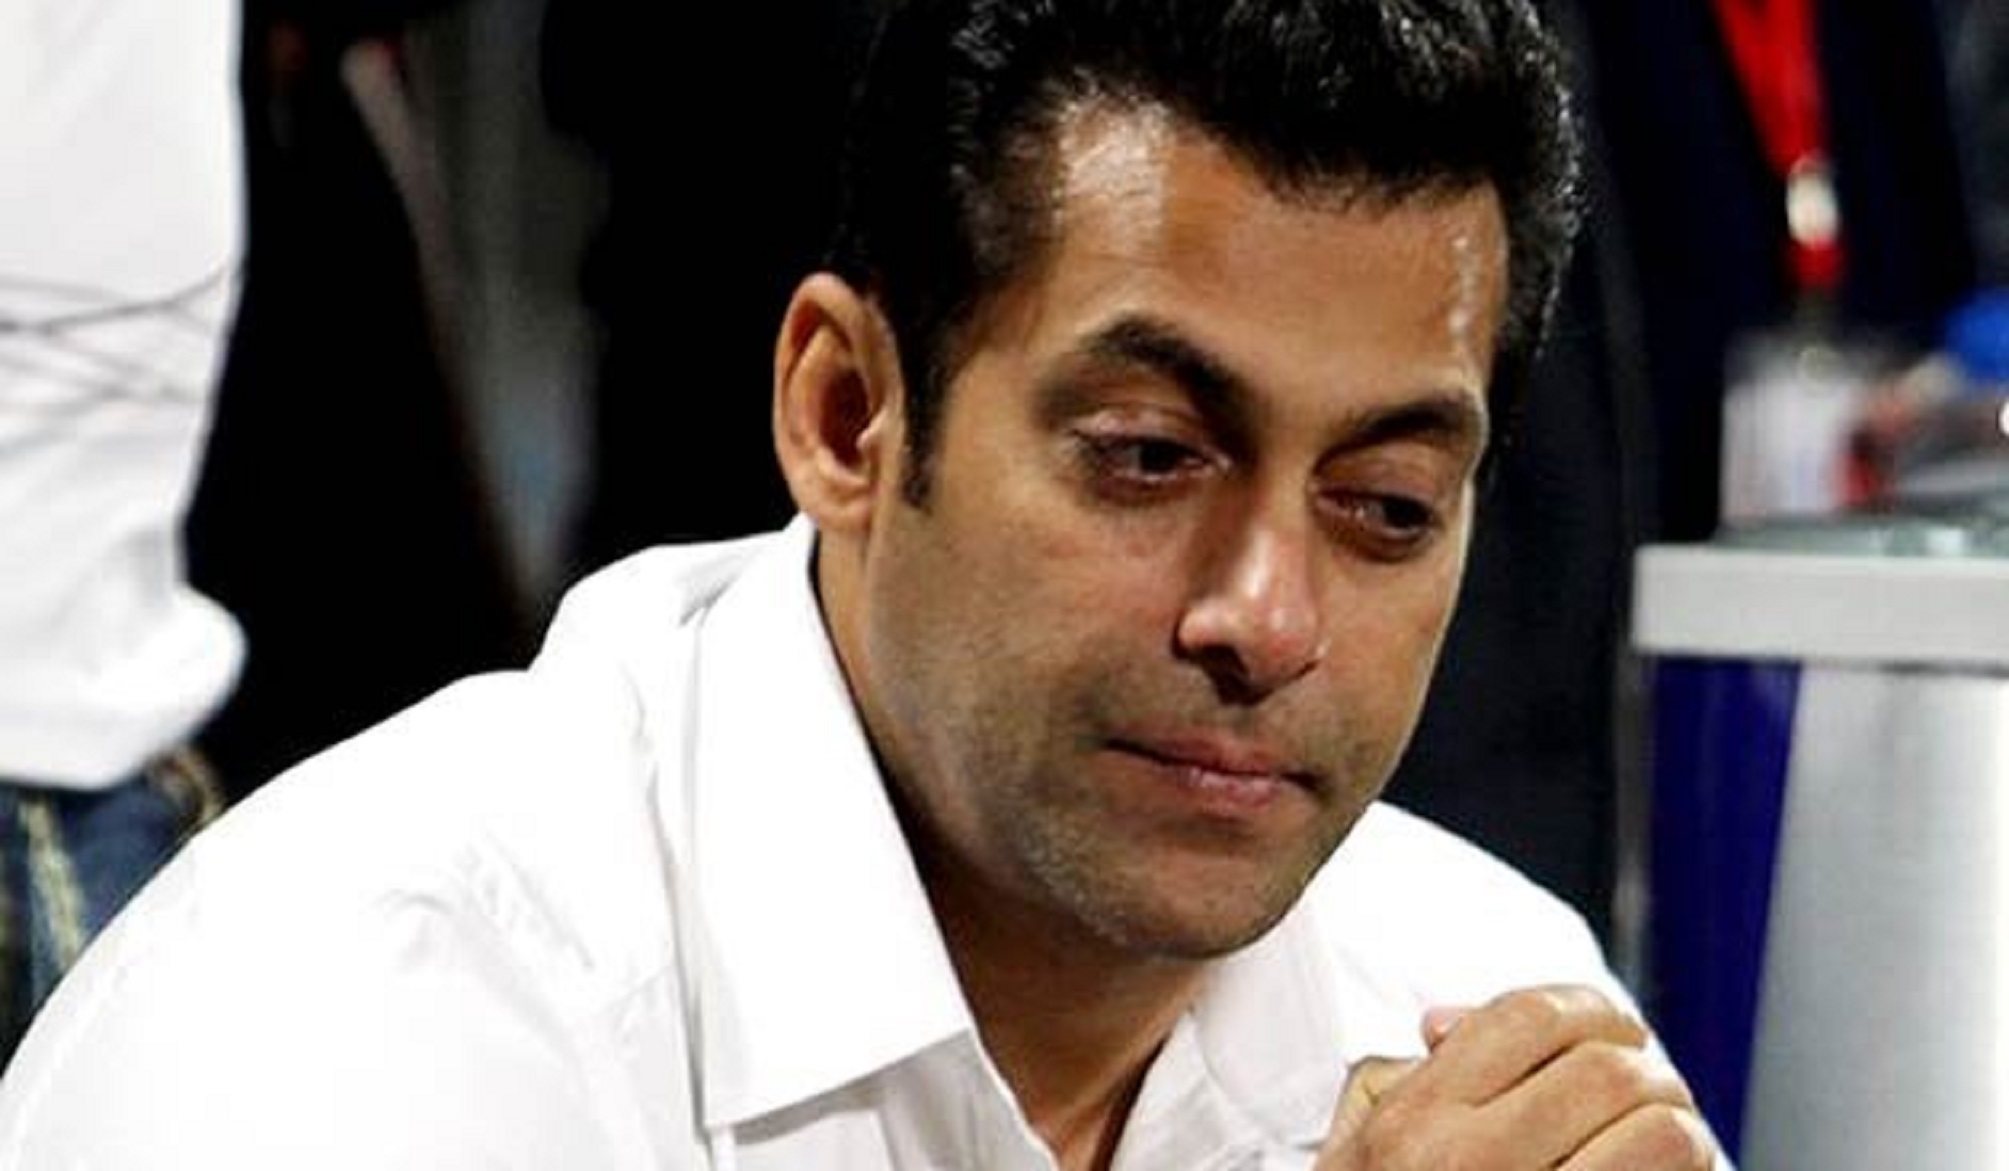 Salman Khan Becomes Emotional As He Remembers When He Had Little Money & Times Were Bad